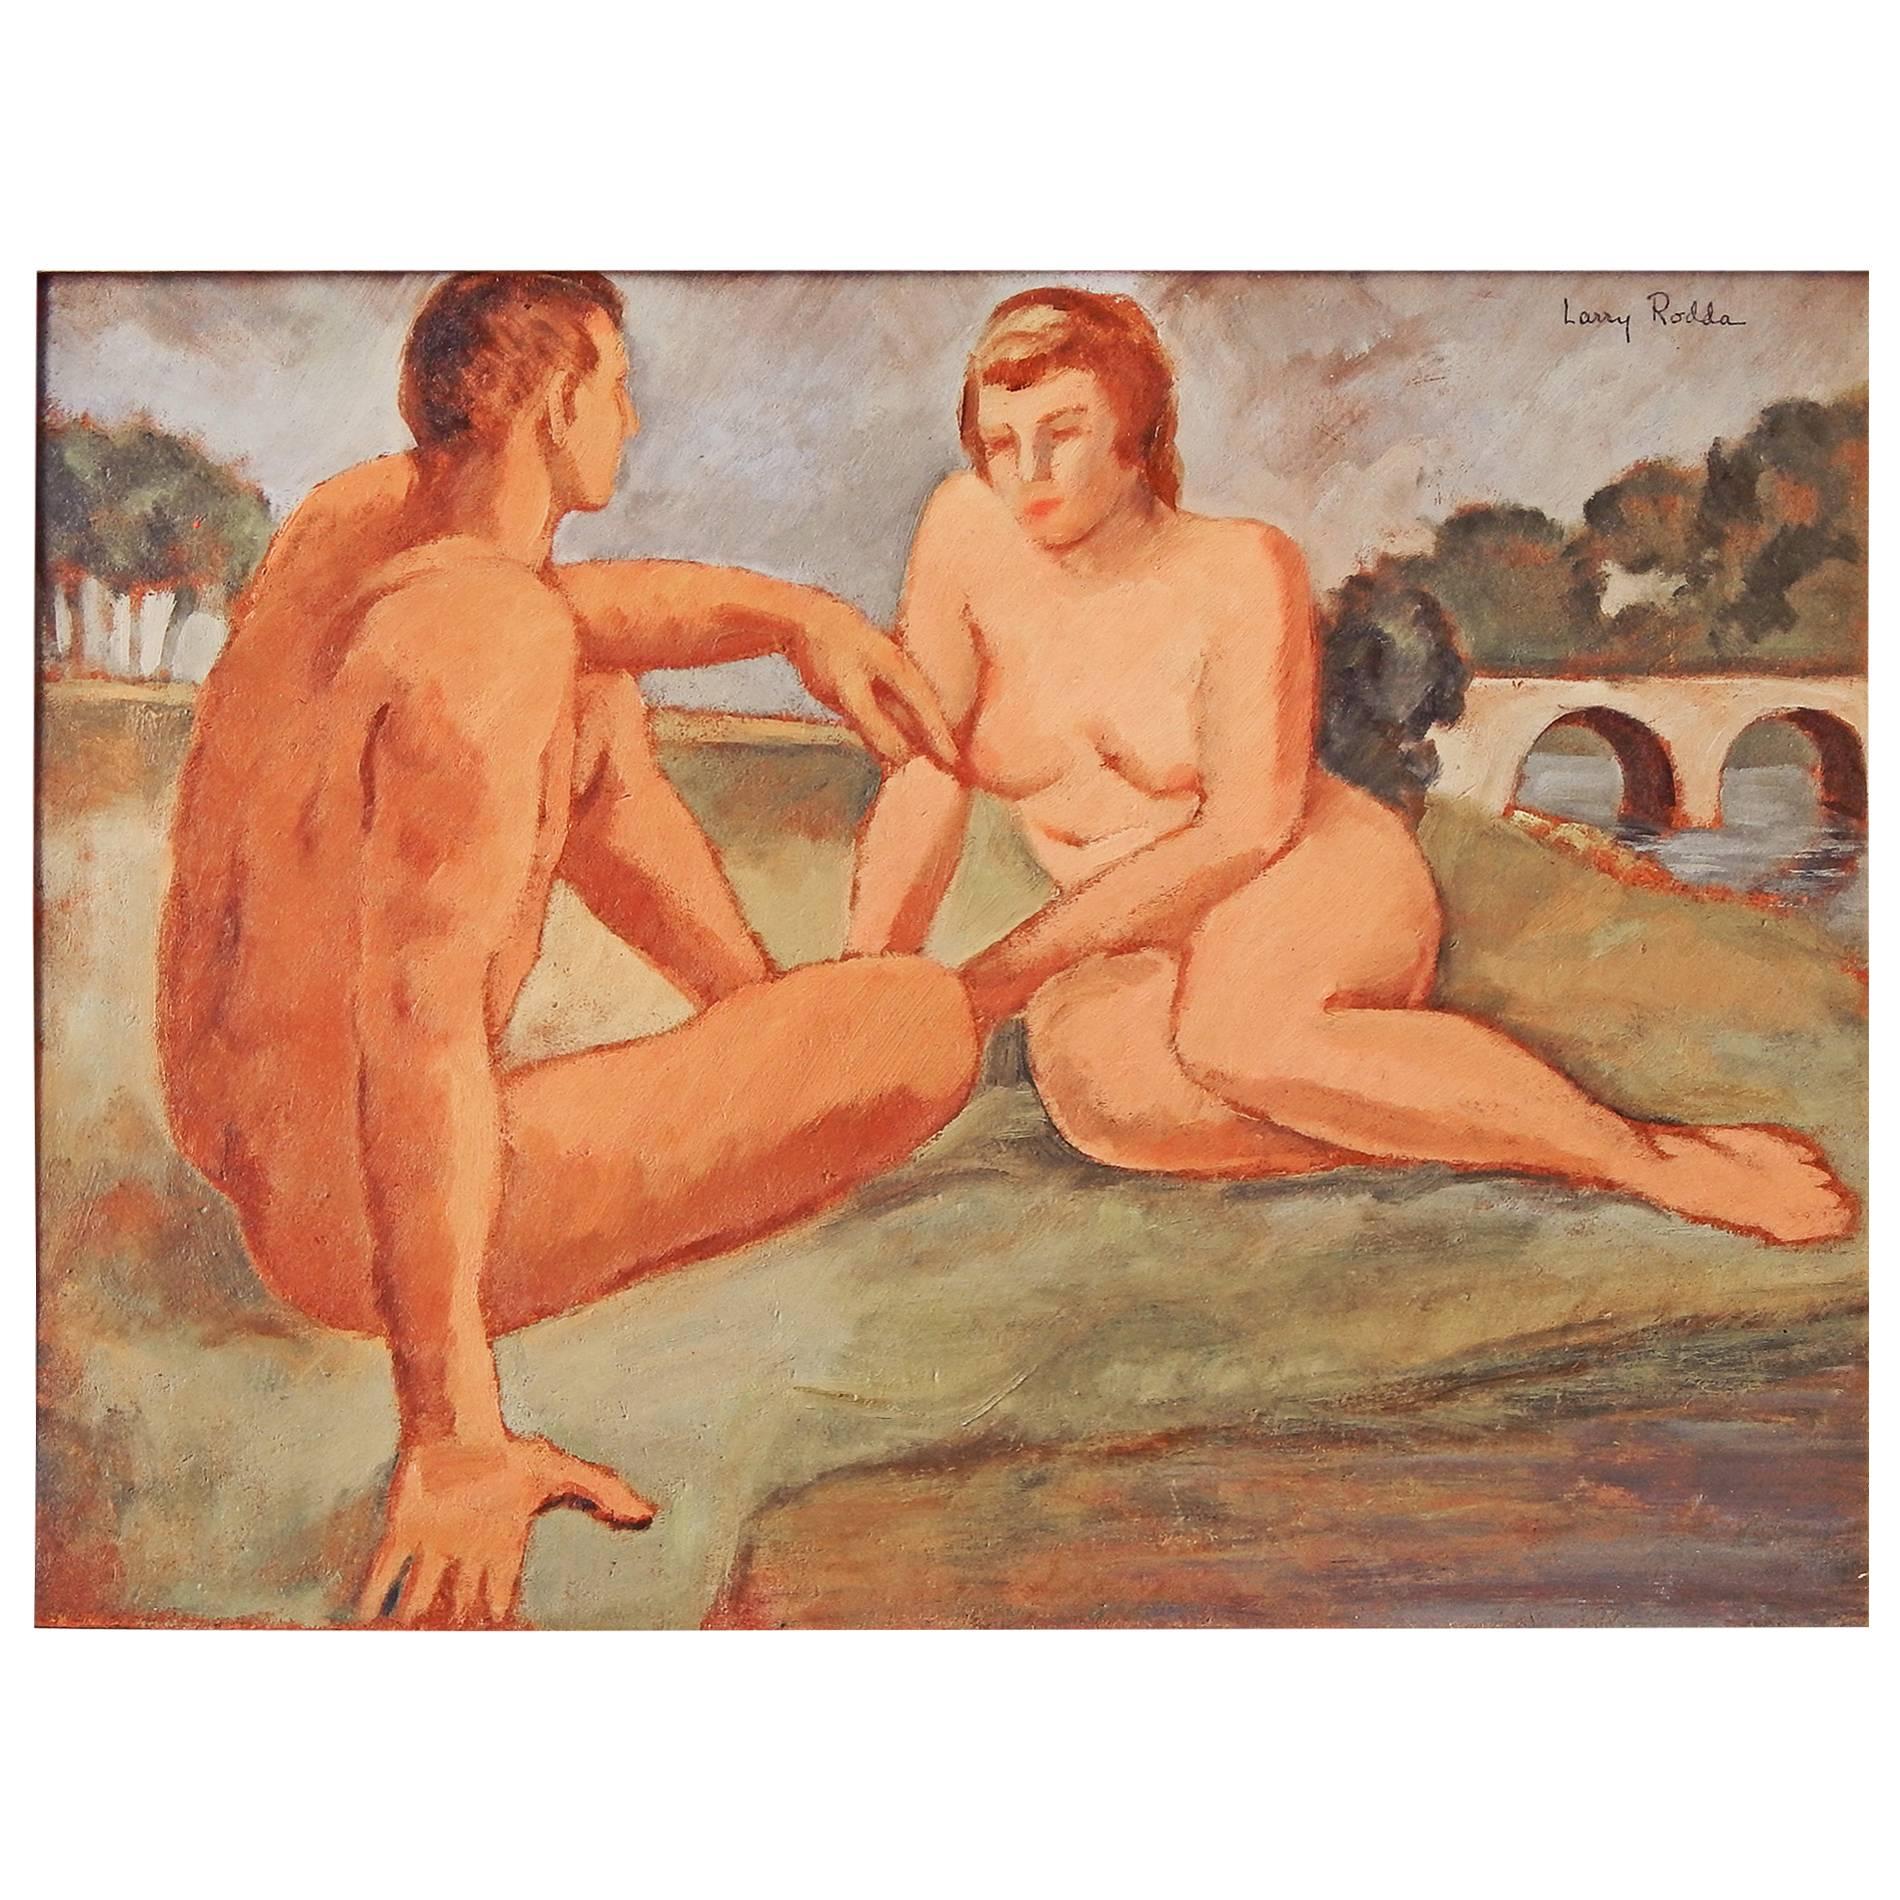 "Nudes with Arched Bridge, " WPA Period Painting by Rodda, 1930s